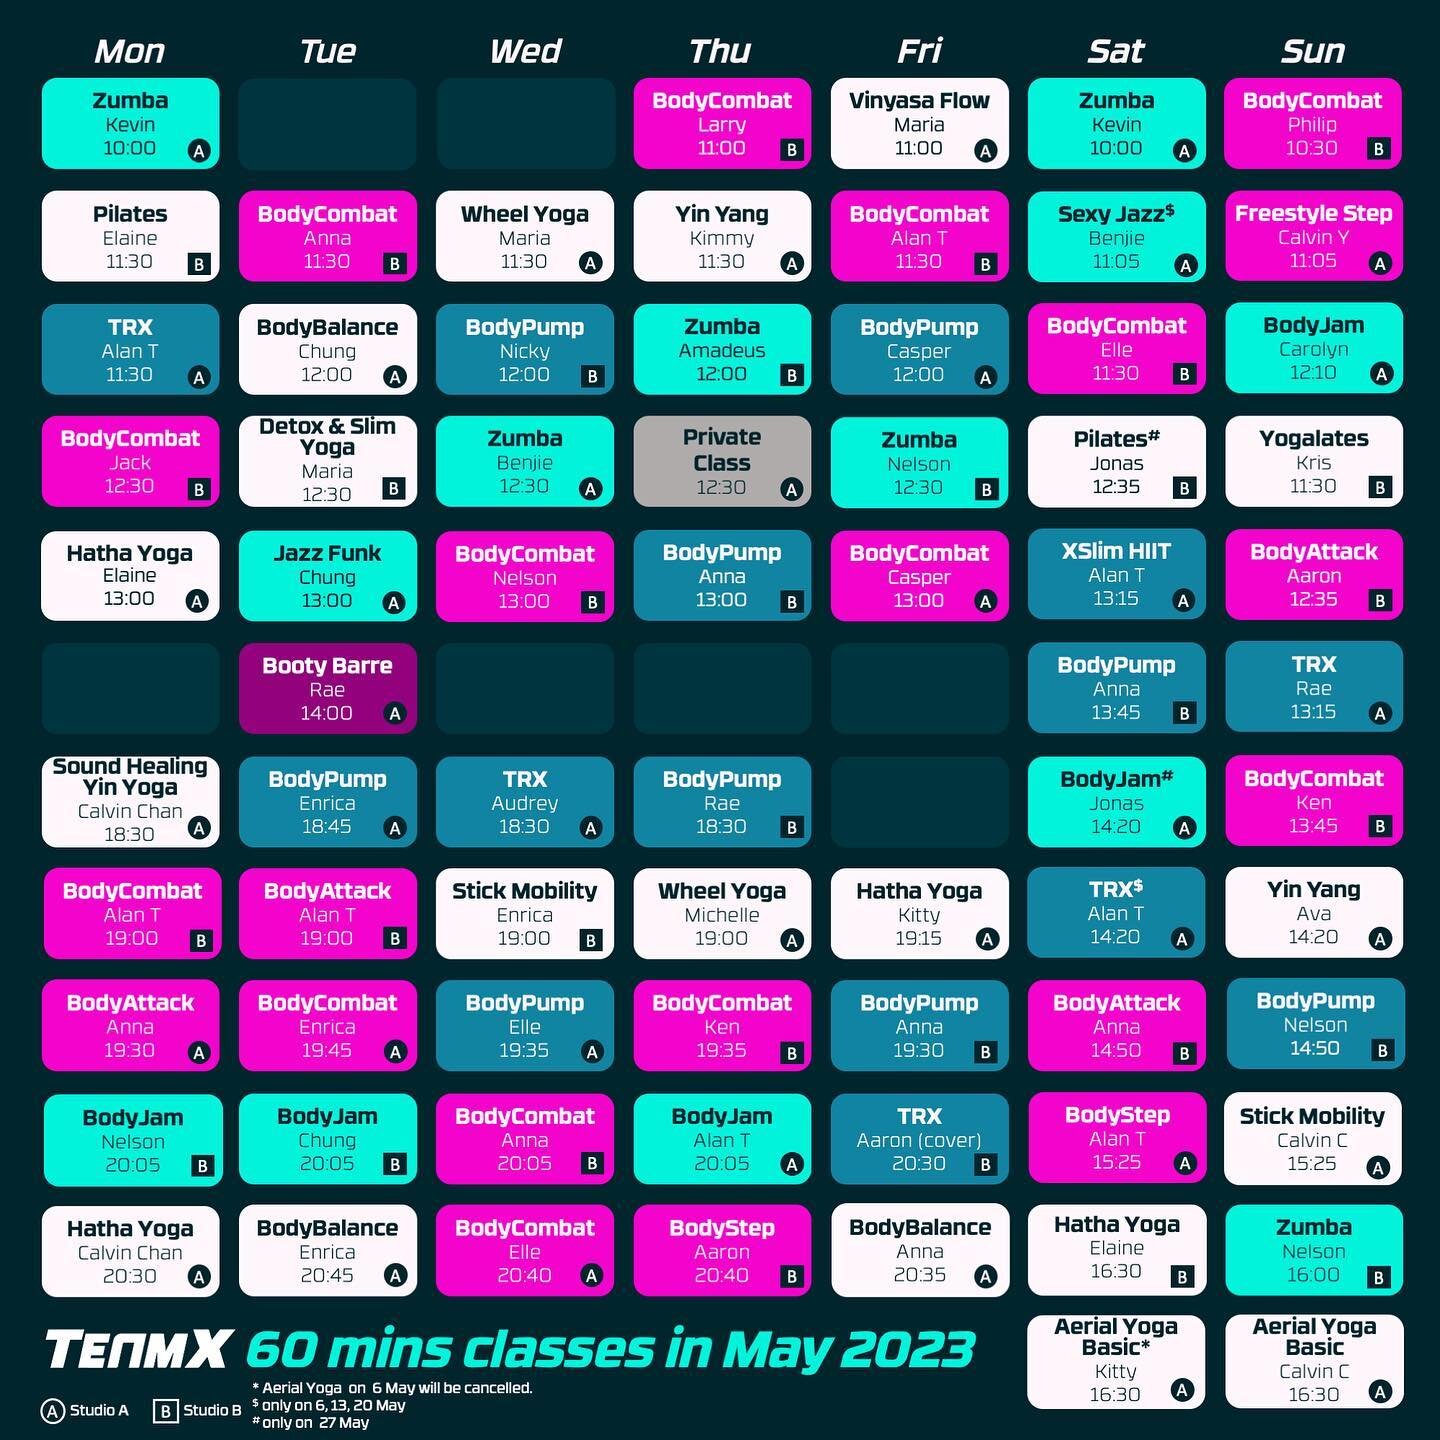 May Class Timetable Update
Get ready to jazz up your weekends with Benjie's new Sexy Jazz class on Saturday mornings, while Jonas is away in May! Don't miss out on this opportunity to learn some fun and sexy moves. And, we're thrilled to welcome Mich